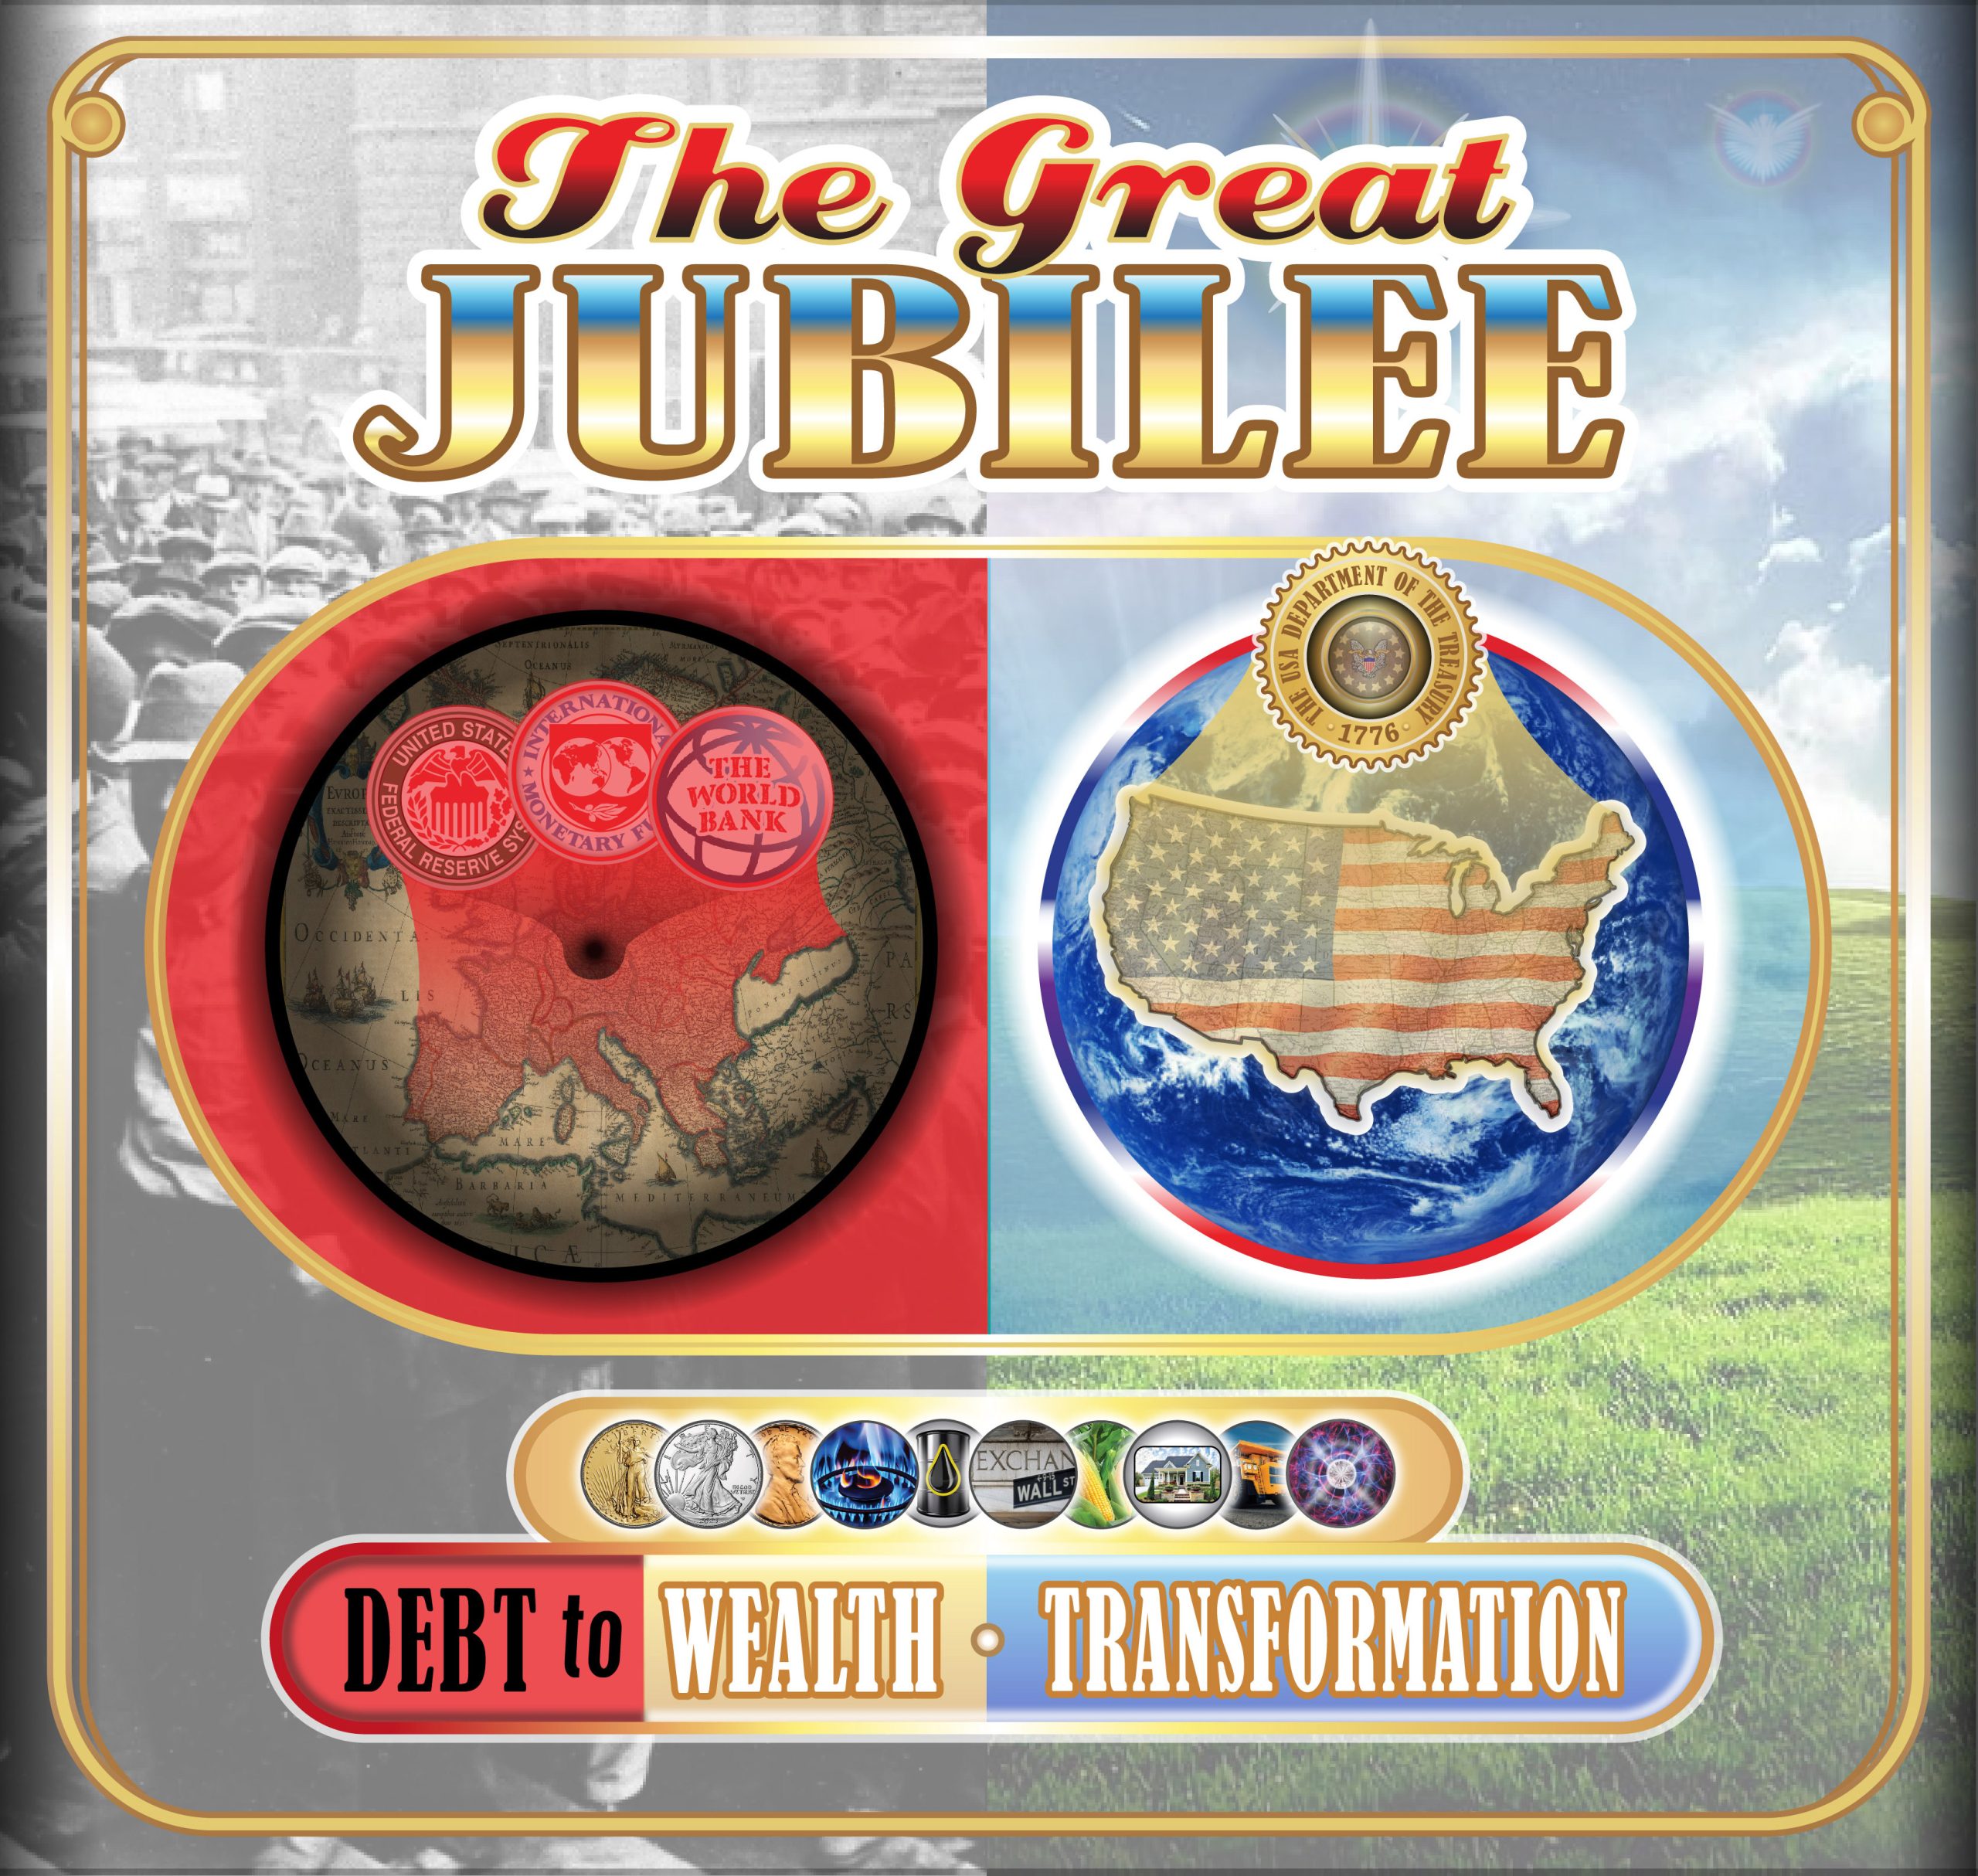 A New Dawn: The Jubilee Begins with the US Treasury Certificate on April 8. The Future of Money